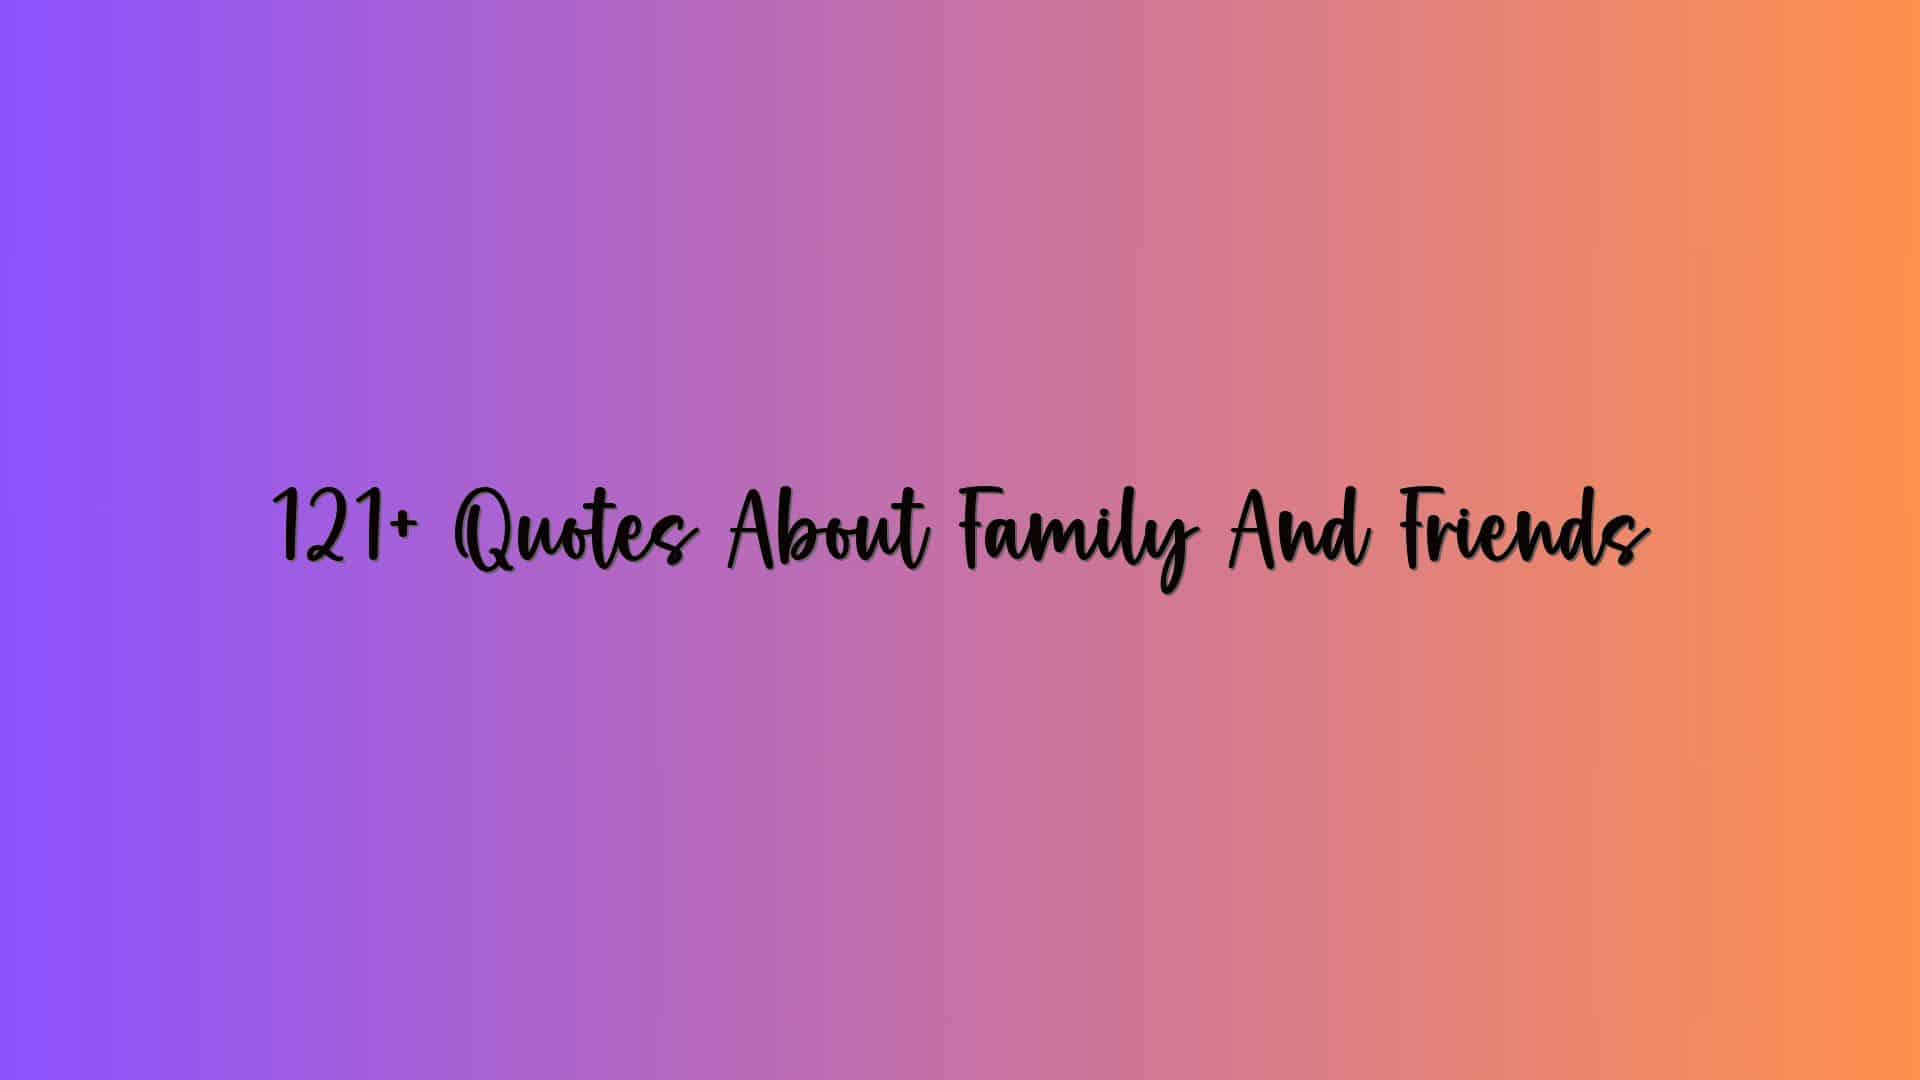 121+ Quotes About Family And Friends